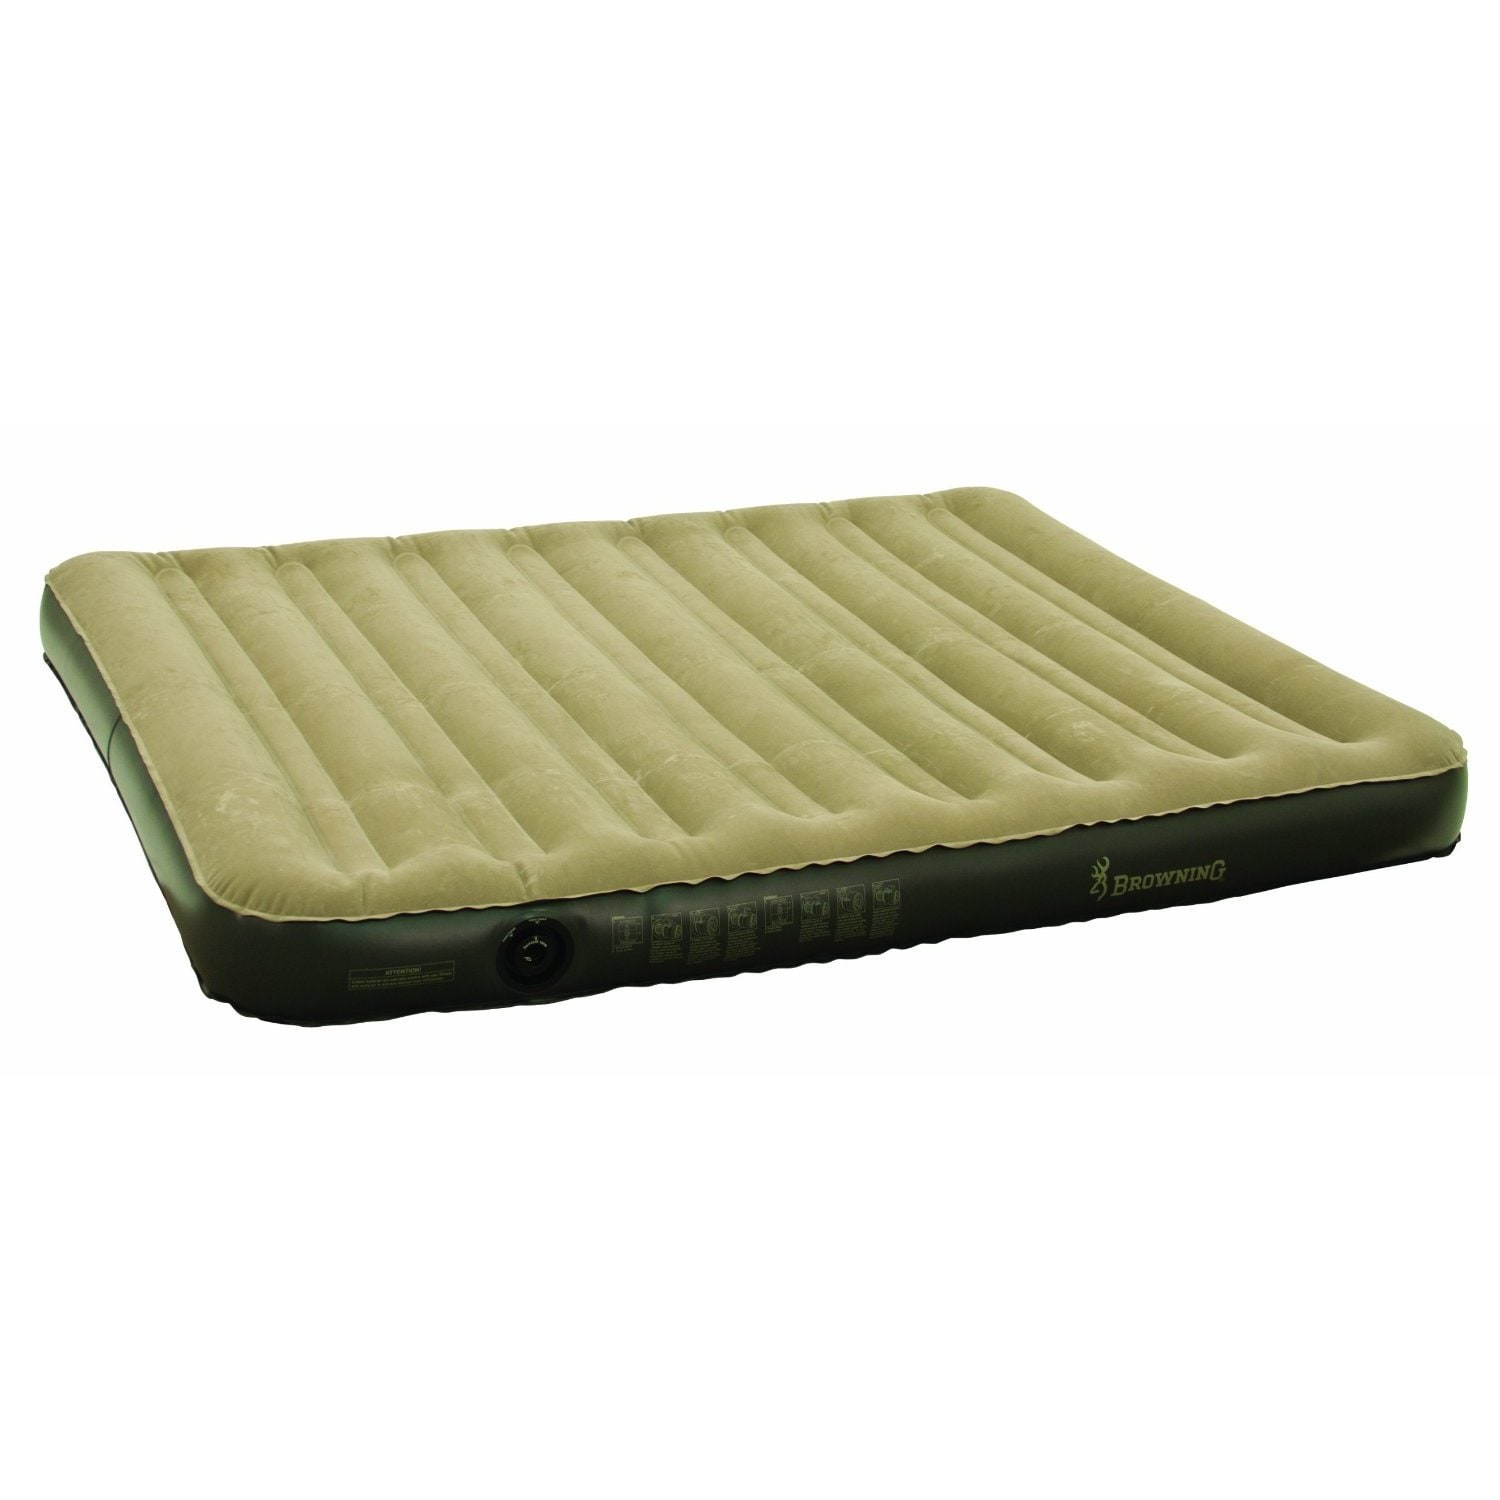 Browning Camping Rechargeable Air Bed Khaki/coal